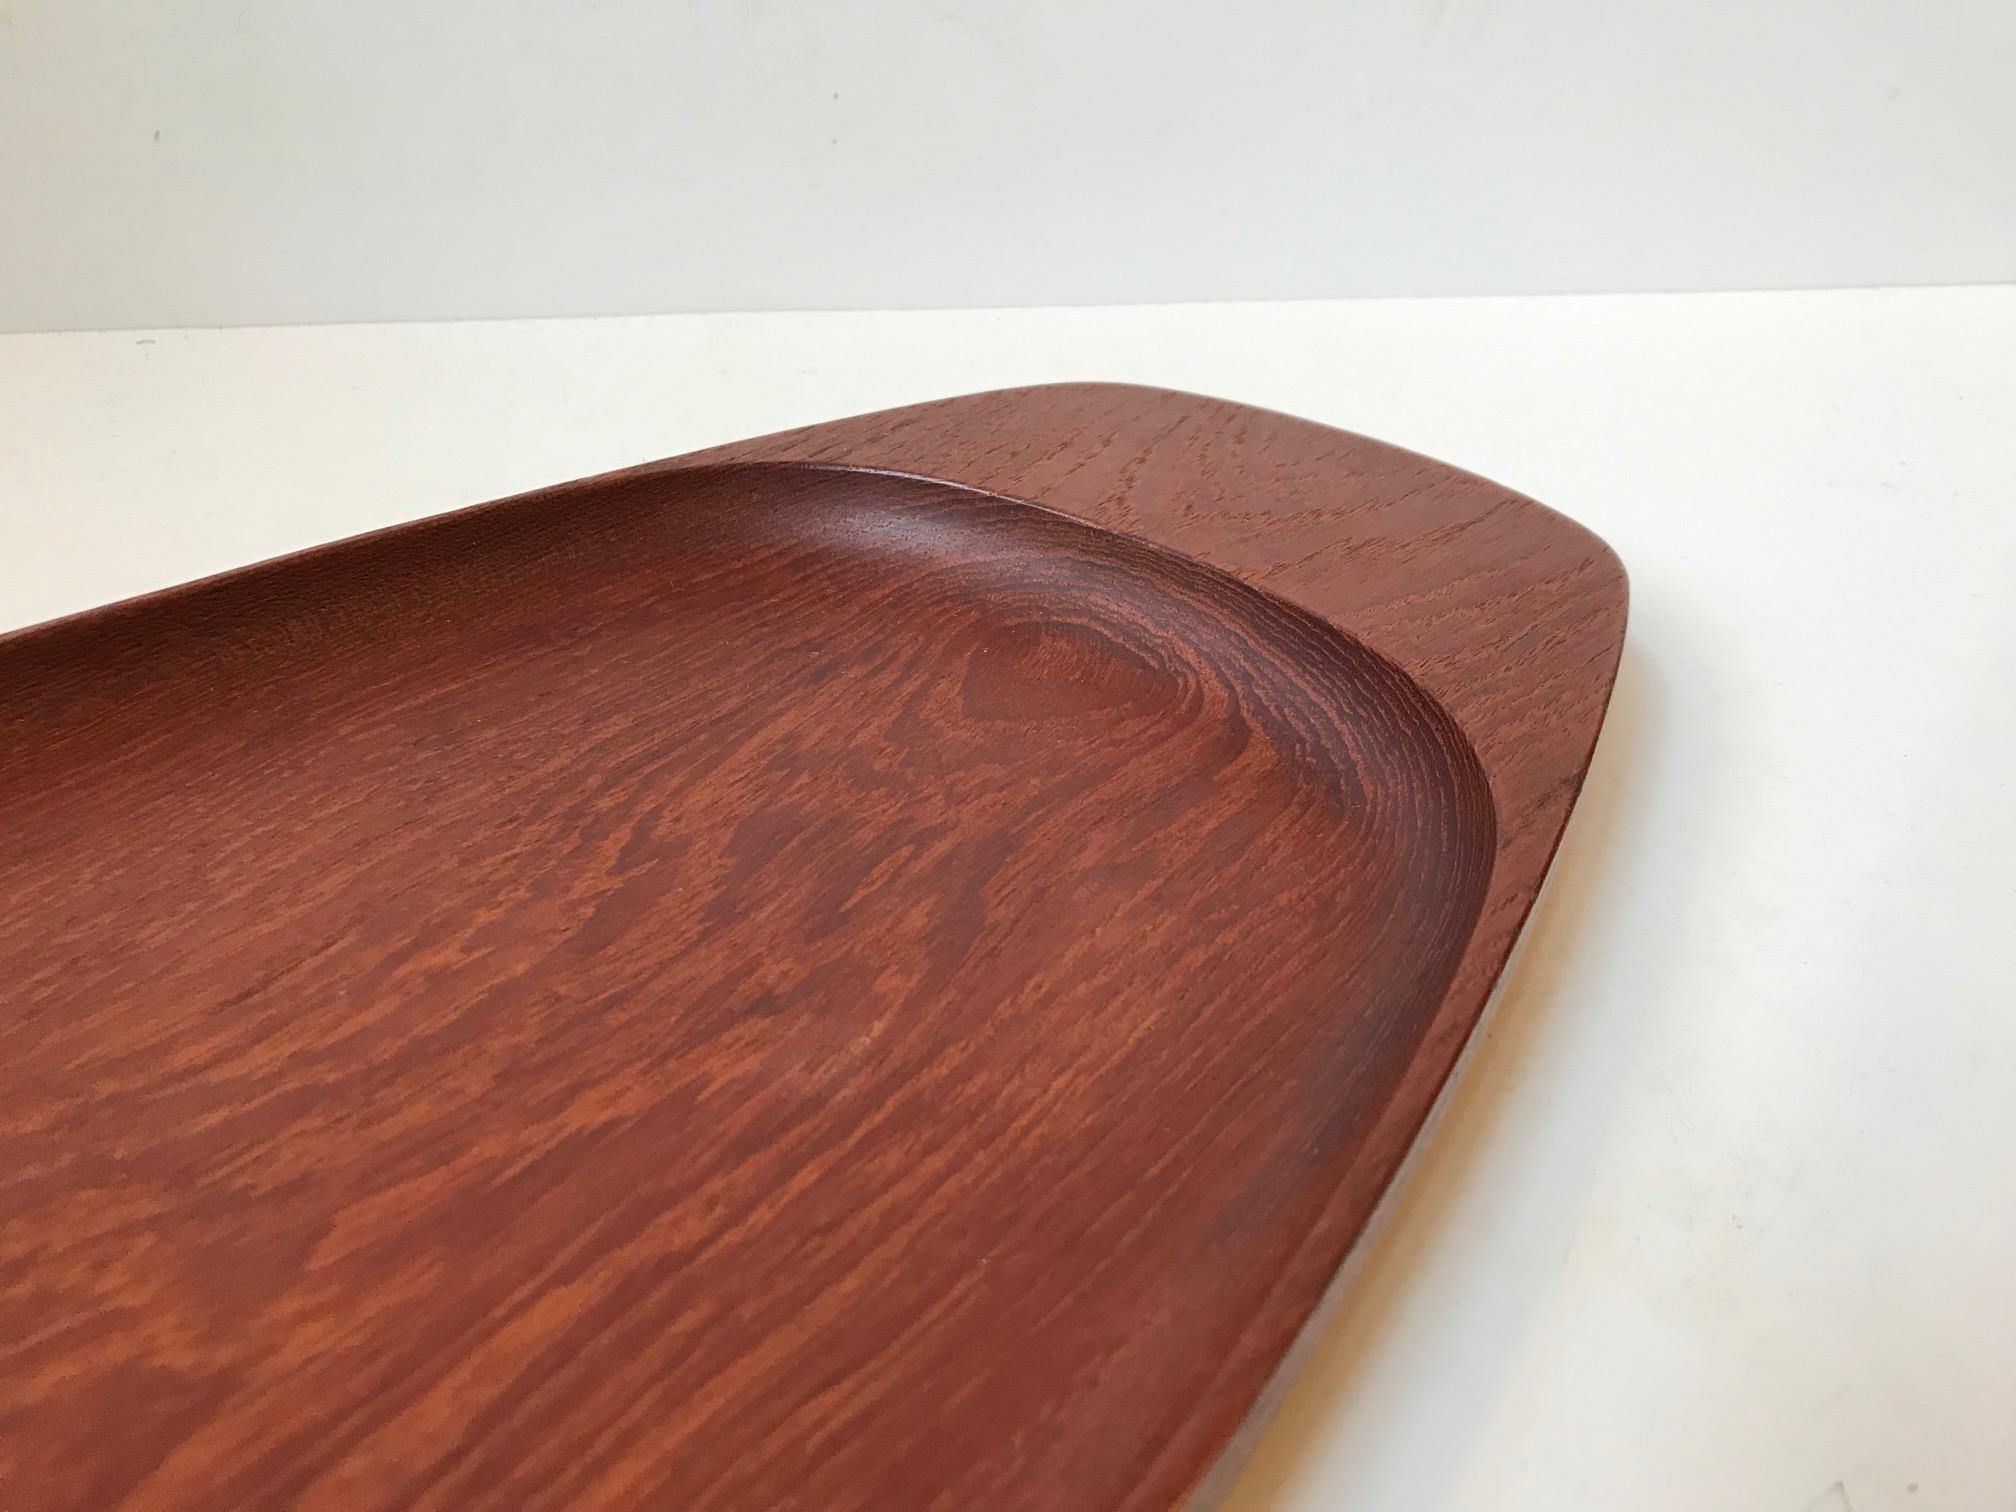 - A large organically shaped tray or dish
- Made from solid teak
- Manufactured and designed by Wiggers in Denmark, circa 1960 
- Reminiscent of the designs by Kay Bojesen and Finn Juhl
- Burn marked by the maker to the base.